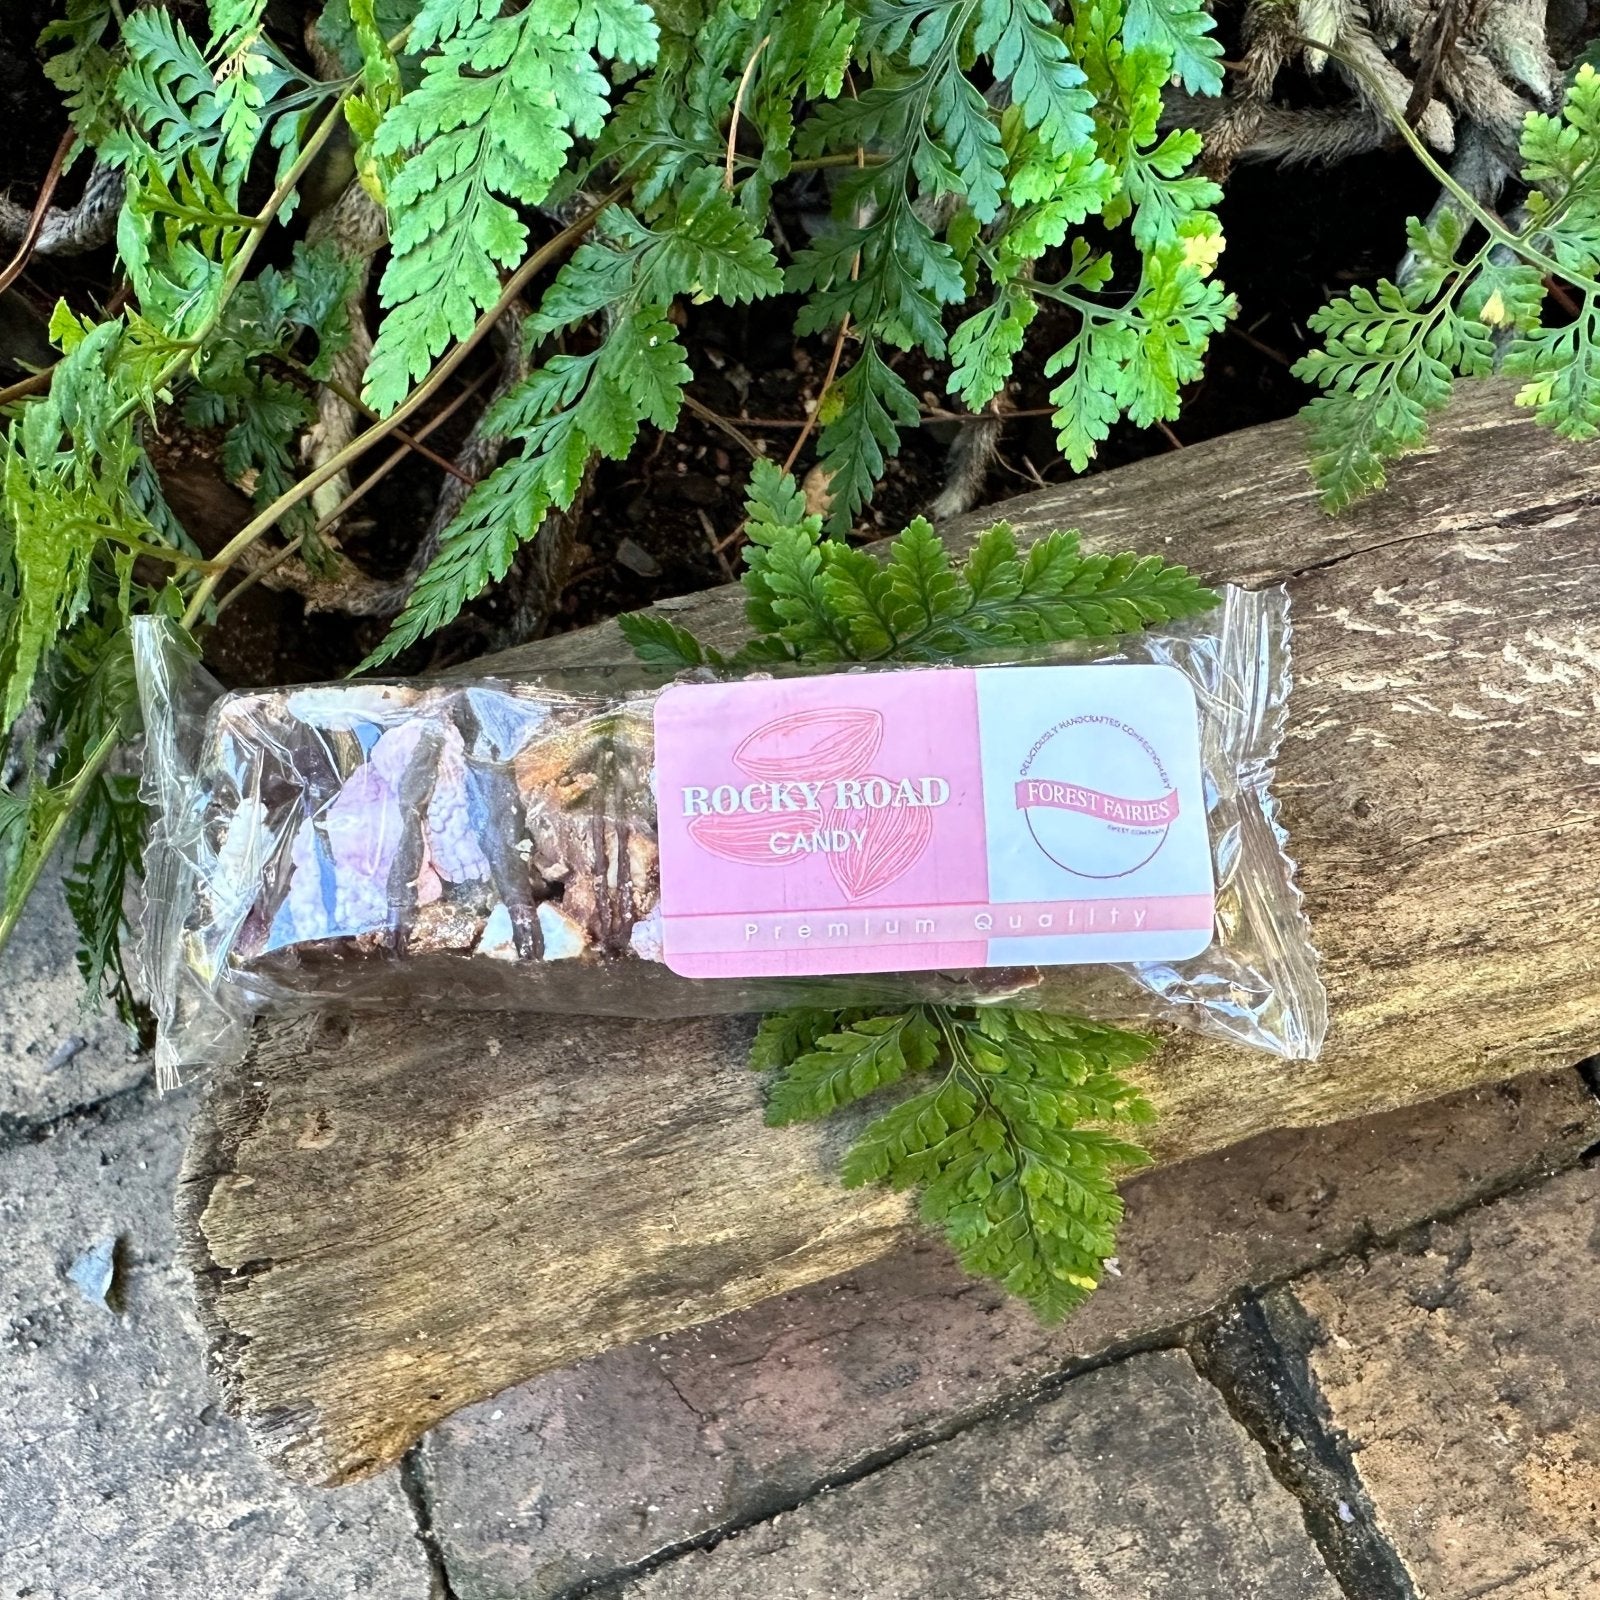 Forest Fairies - Rocky Road Candy (45g) - The Deli